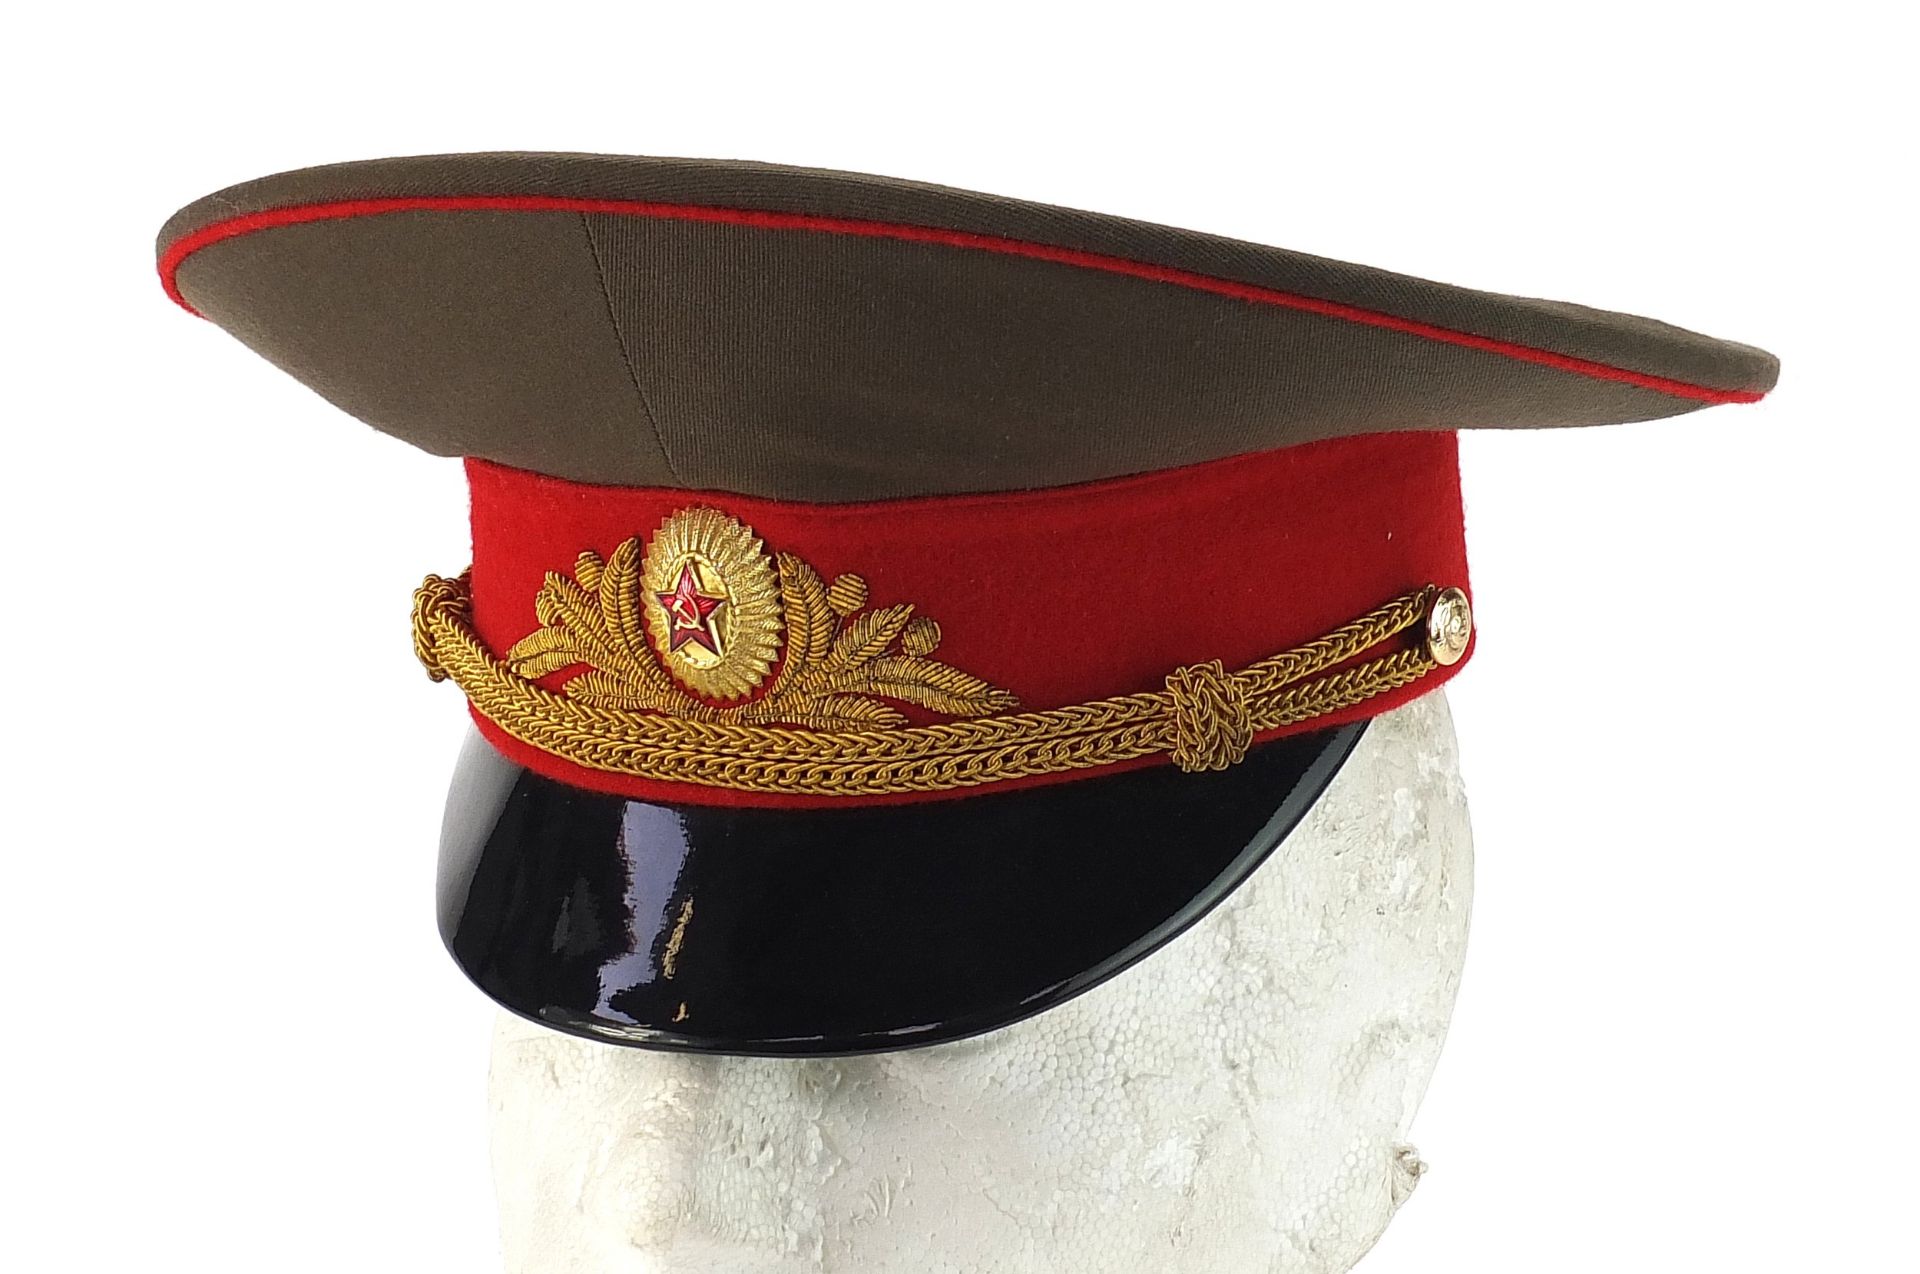 Russian military interest visor cap with insignia